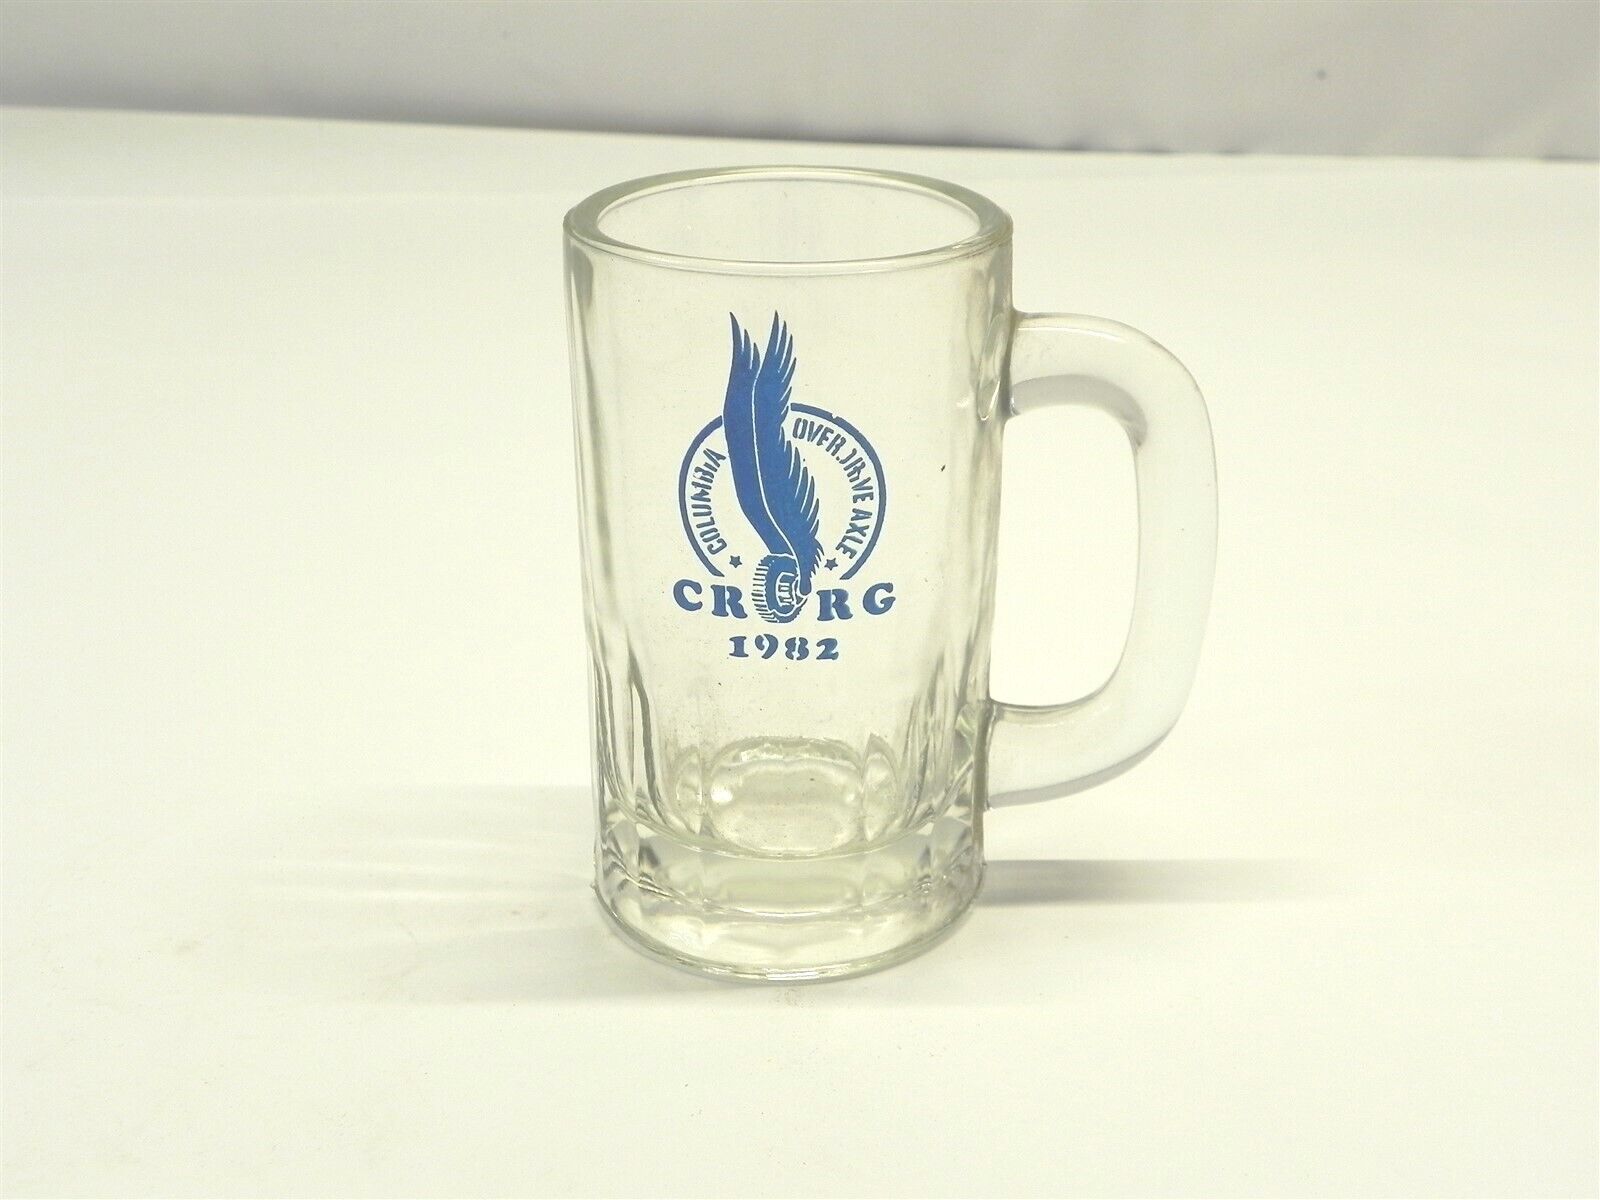 VINTAGE 1982 COLUMBIA OVERDRIVE AXLE CRRG GLASS BEER MUG CUP PRE-OWNED USED 